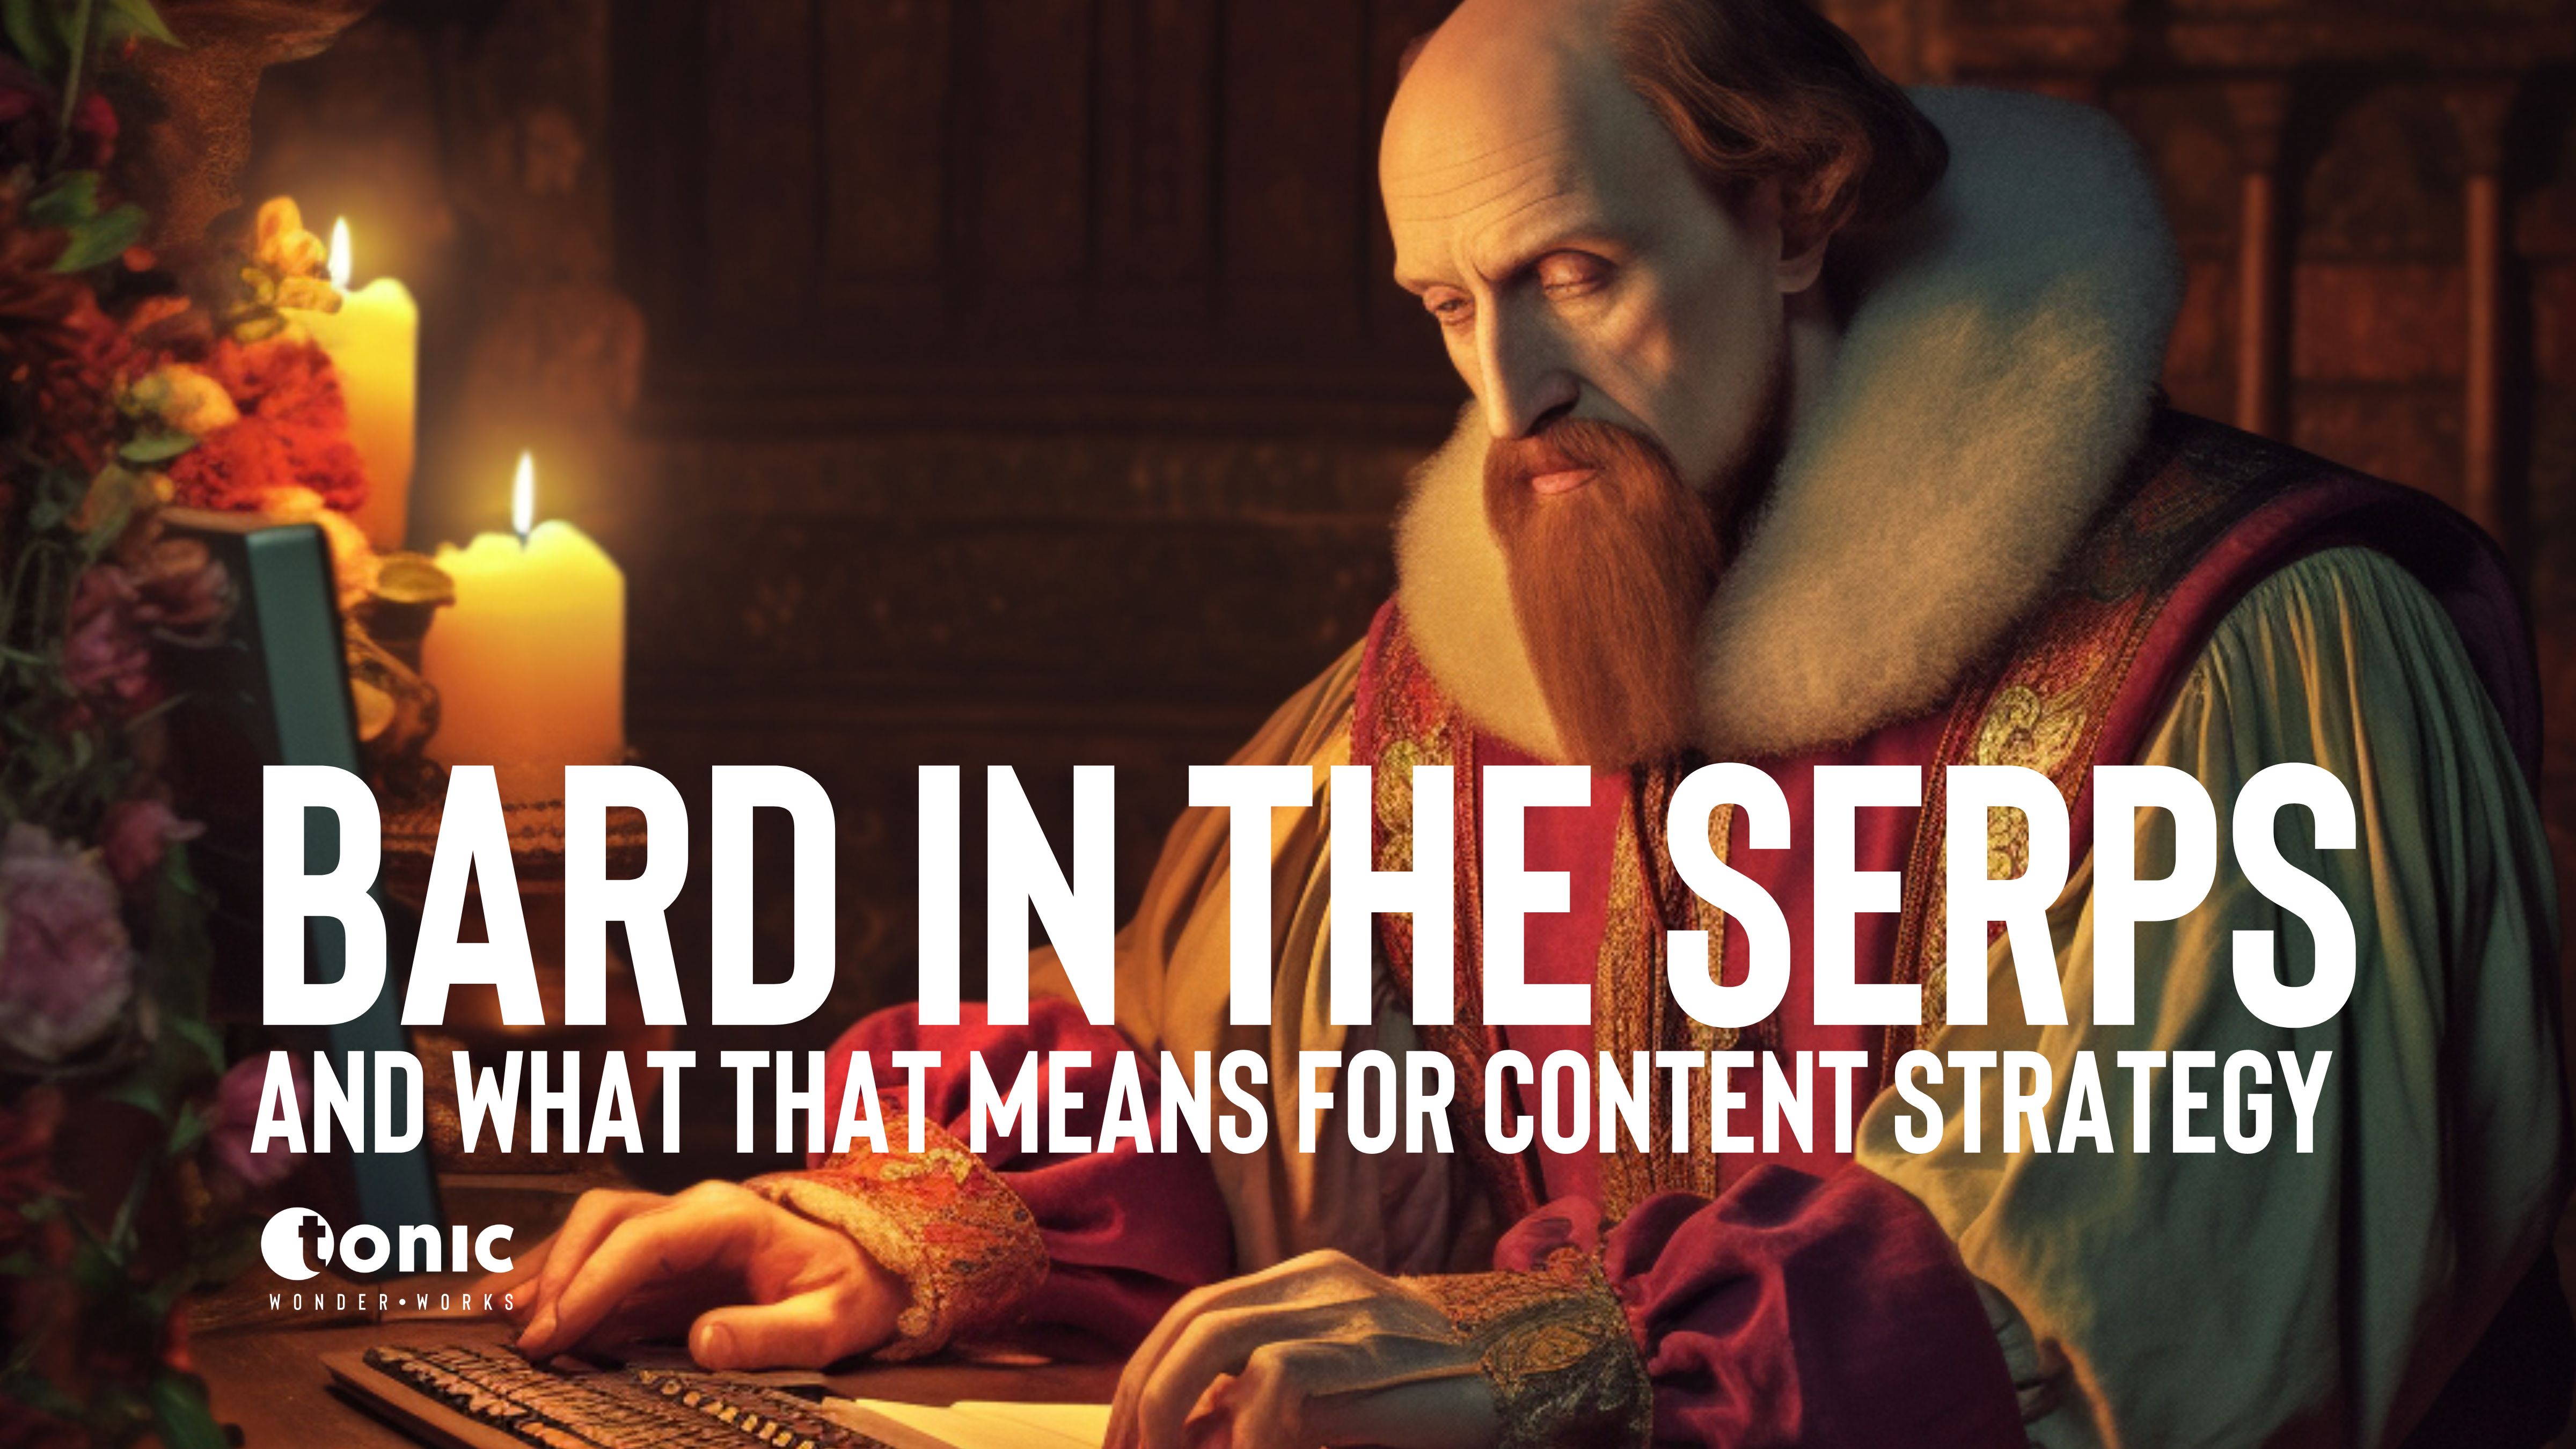 Bard in the SERPs - what does this mean for content?